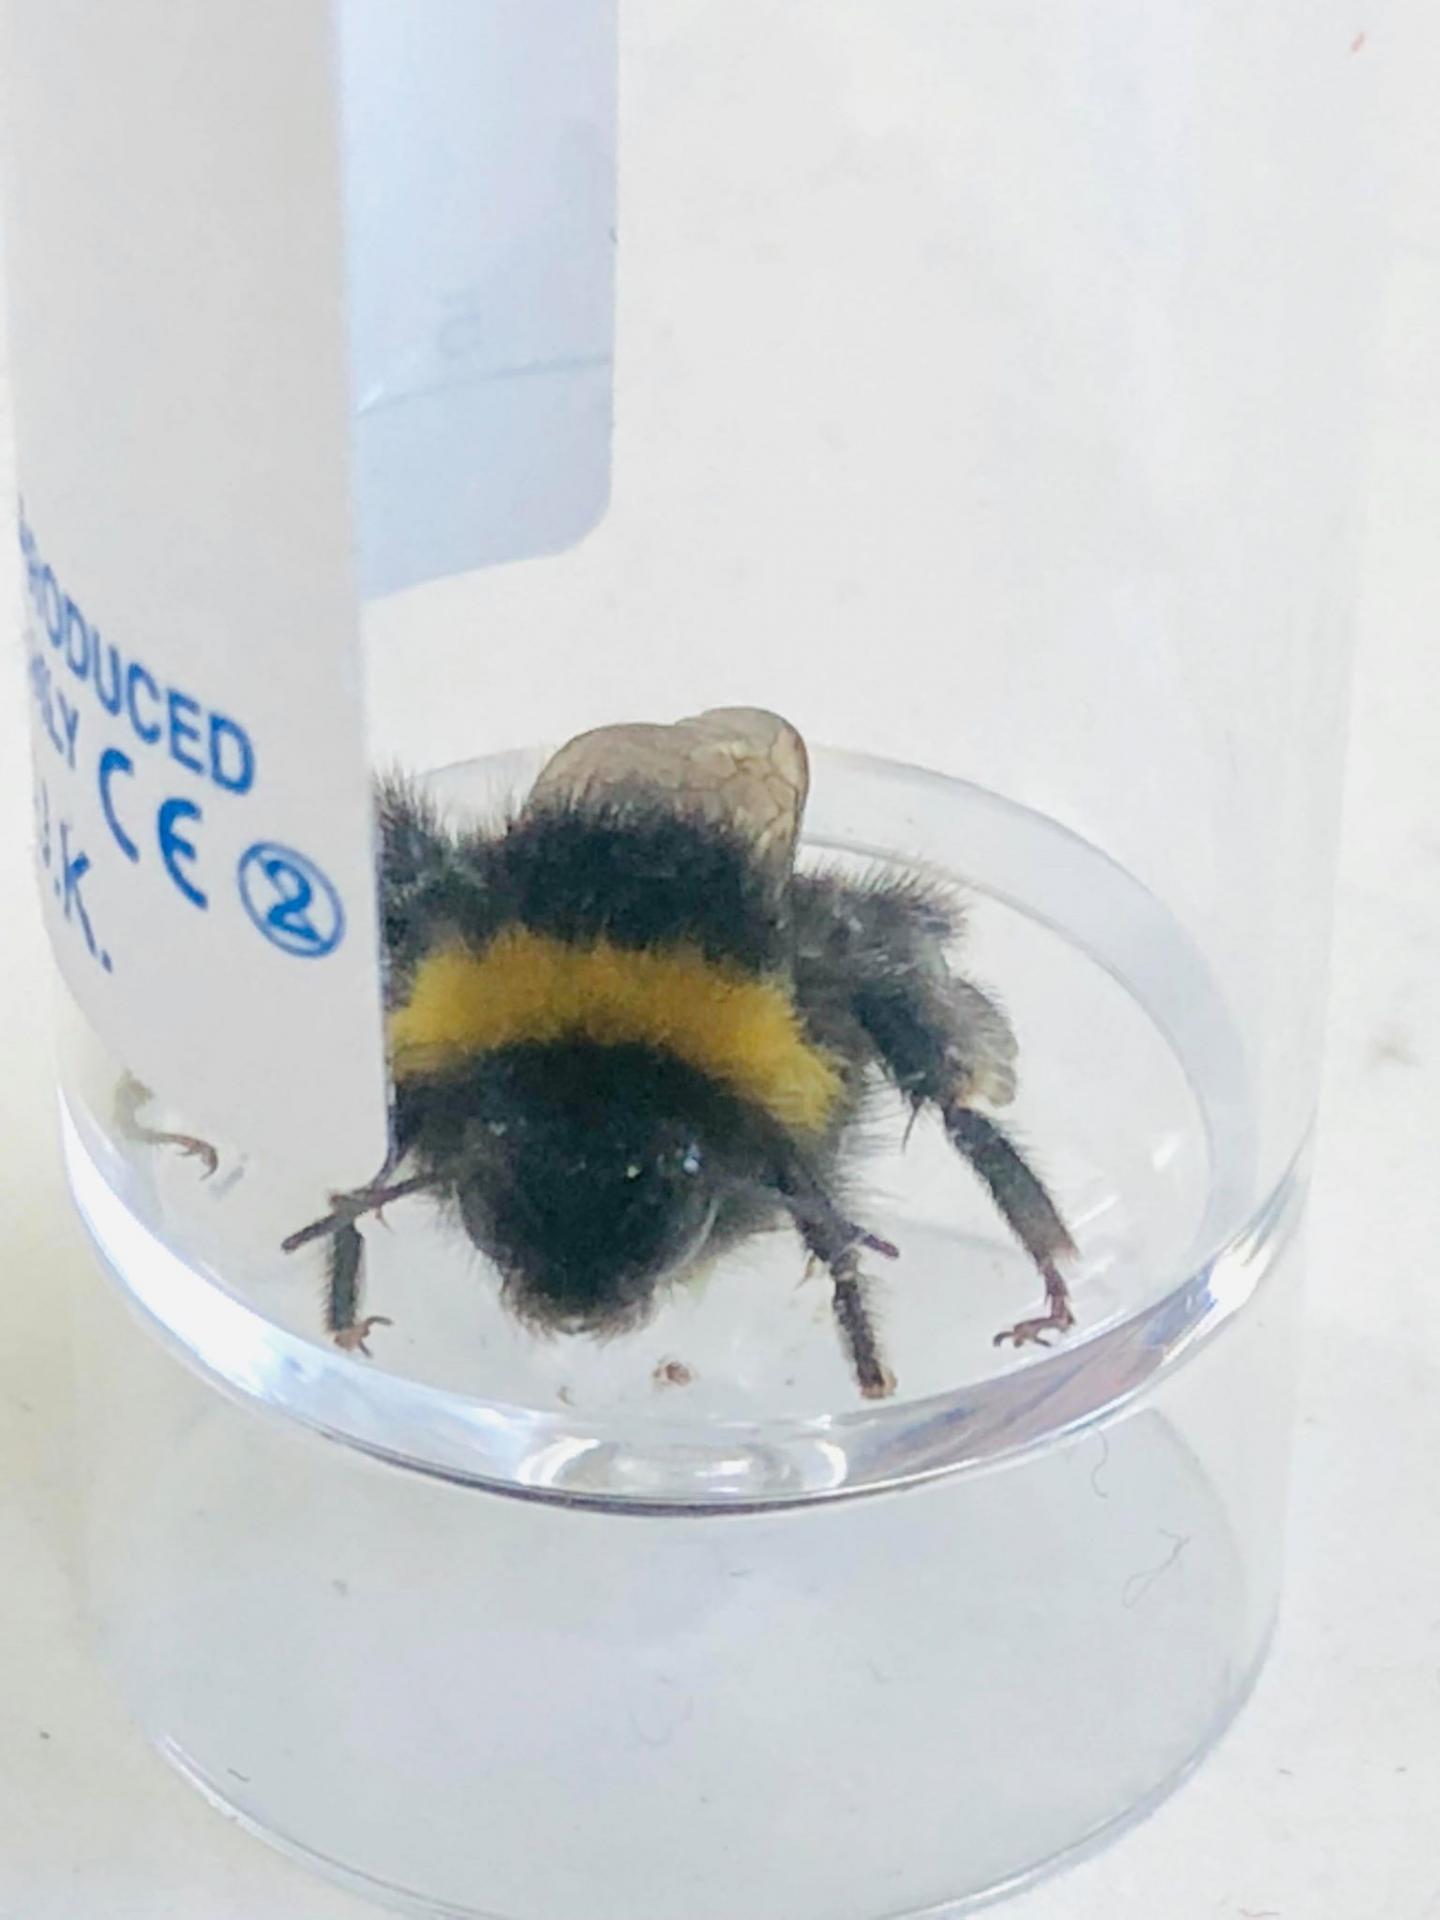 Bumblebee in the Experiment